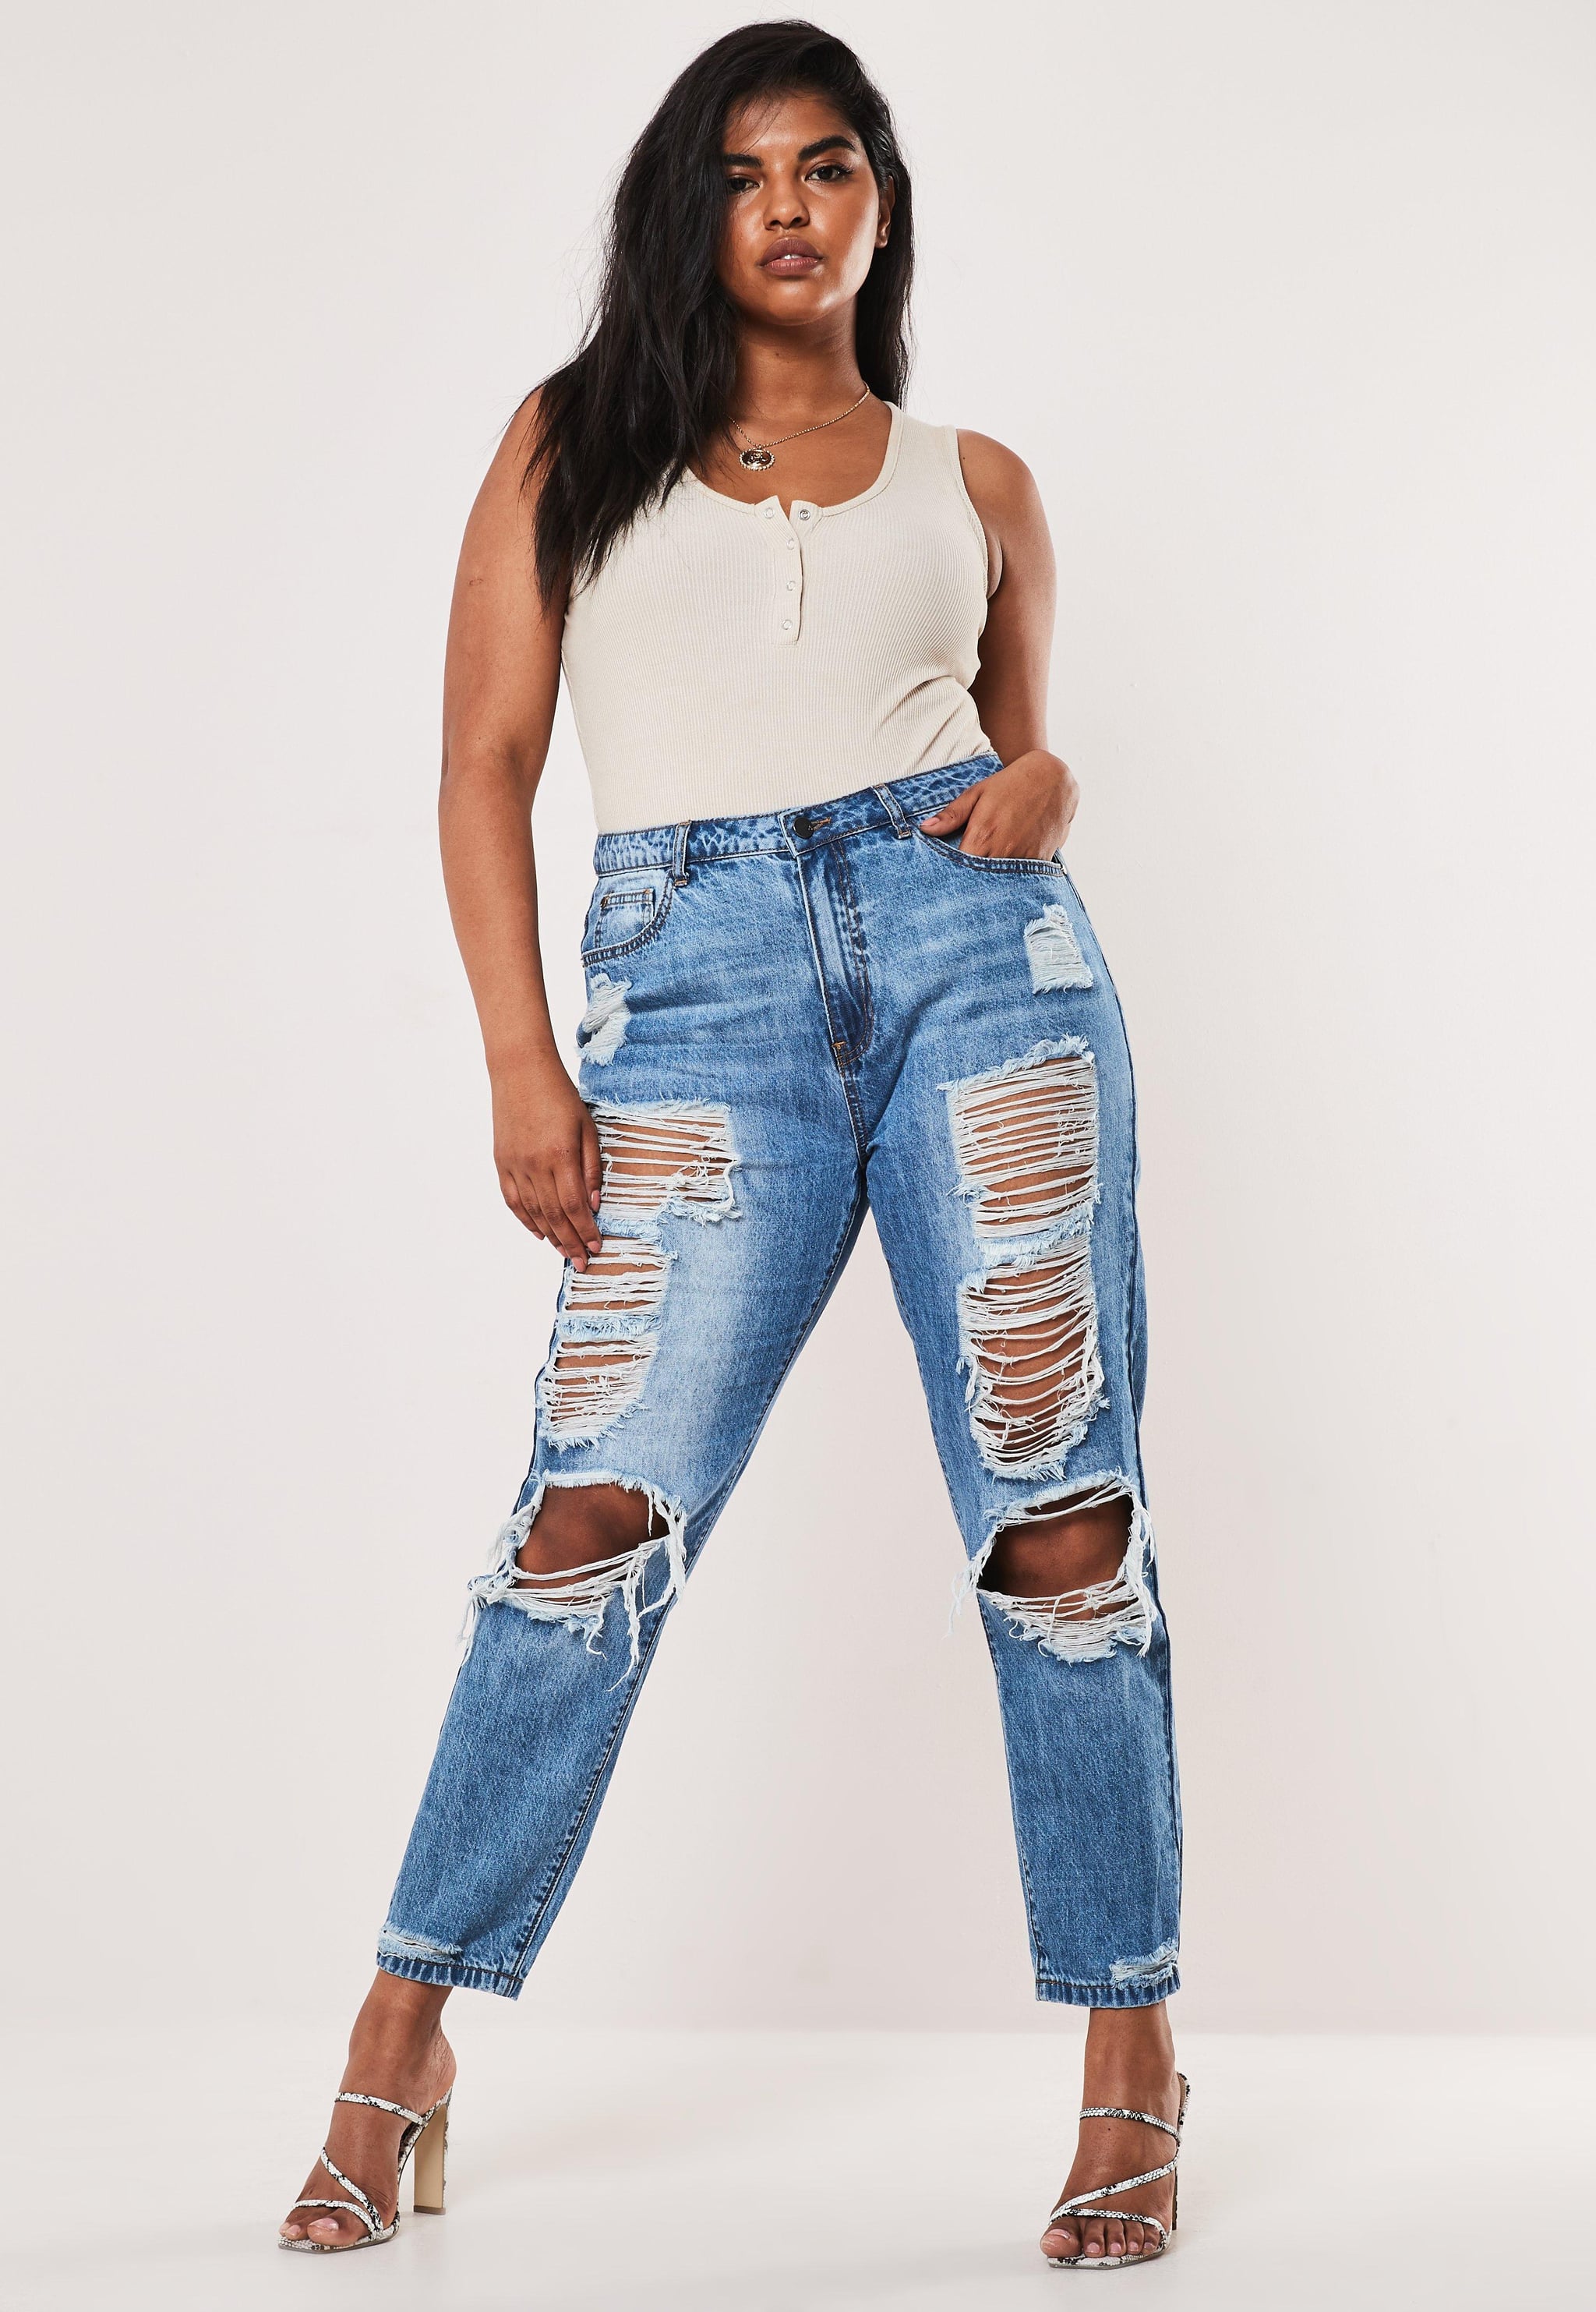 Verrassend genoeg schakelaar Grondwet Missguided Blue Stonewash Riot Distressed Jeans | Billie Eilish Just Took  Me Back to the Days of the Ultra-Rip Jean, and Somehow I Feel More Whole |  POPSUGAR Fashion Photo 8